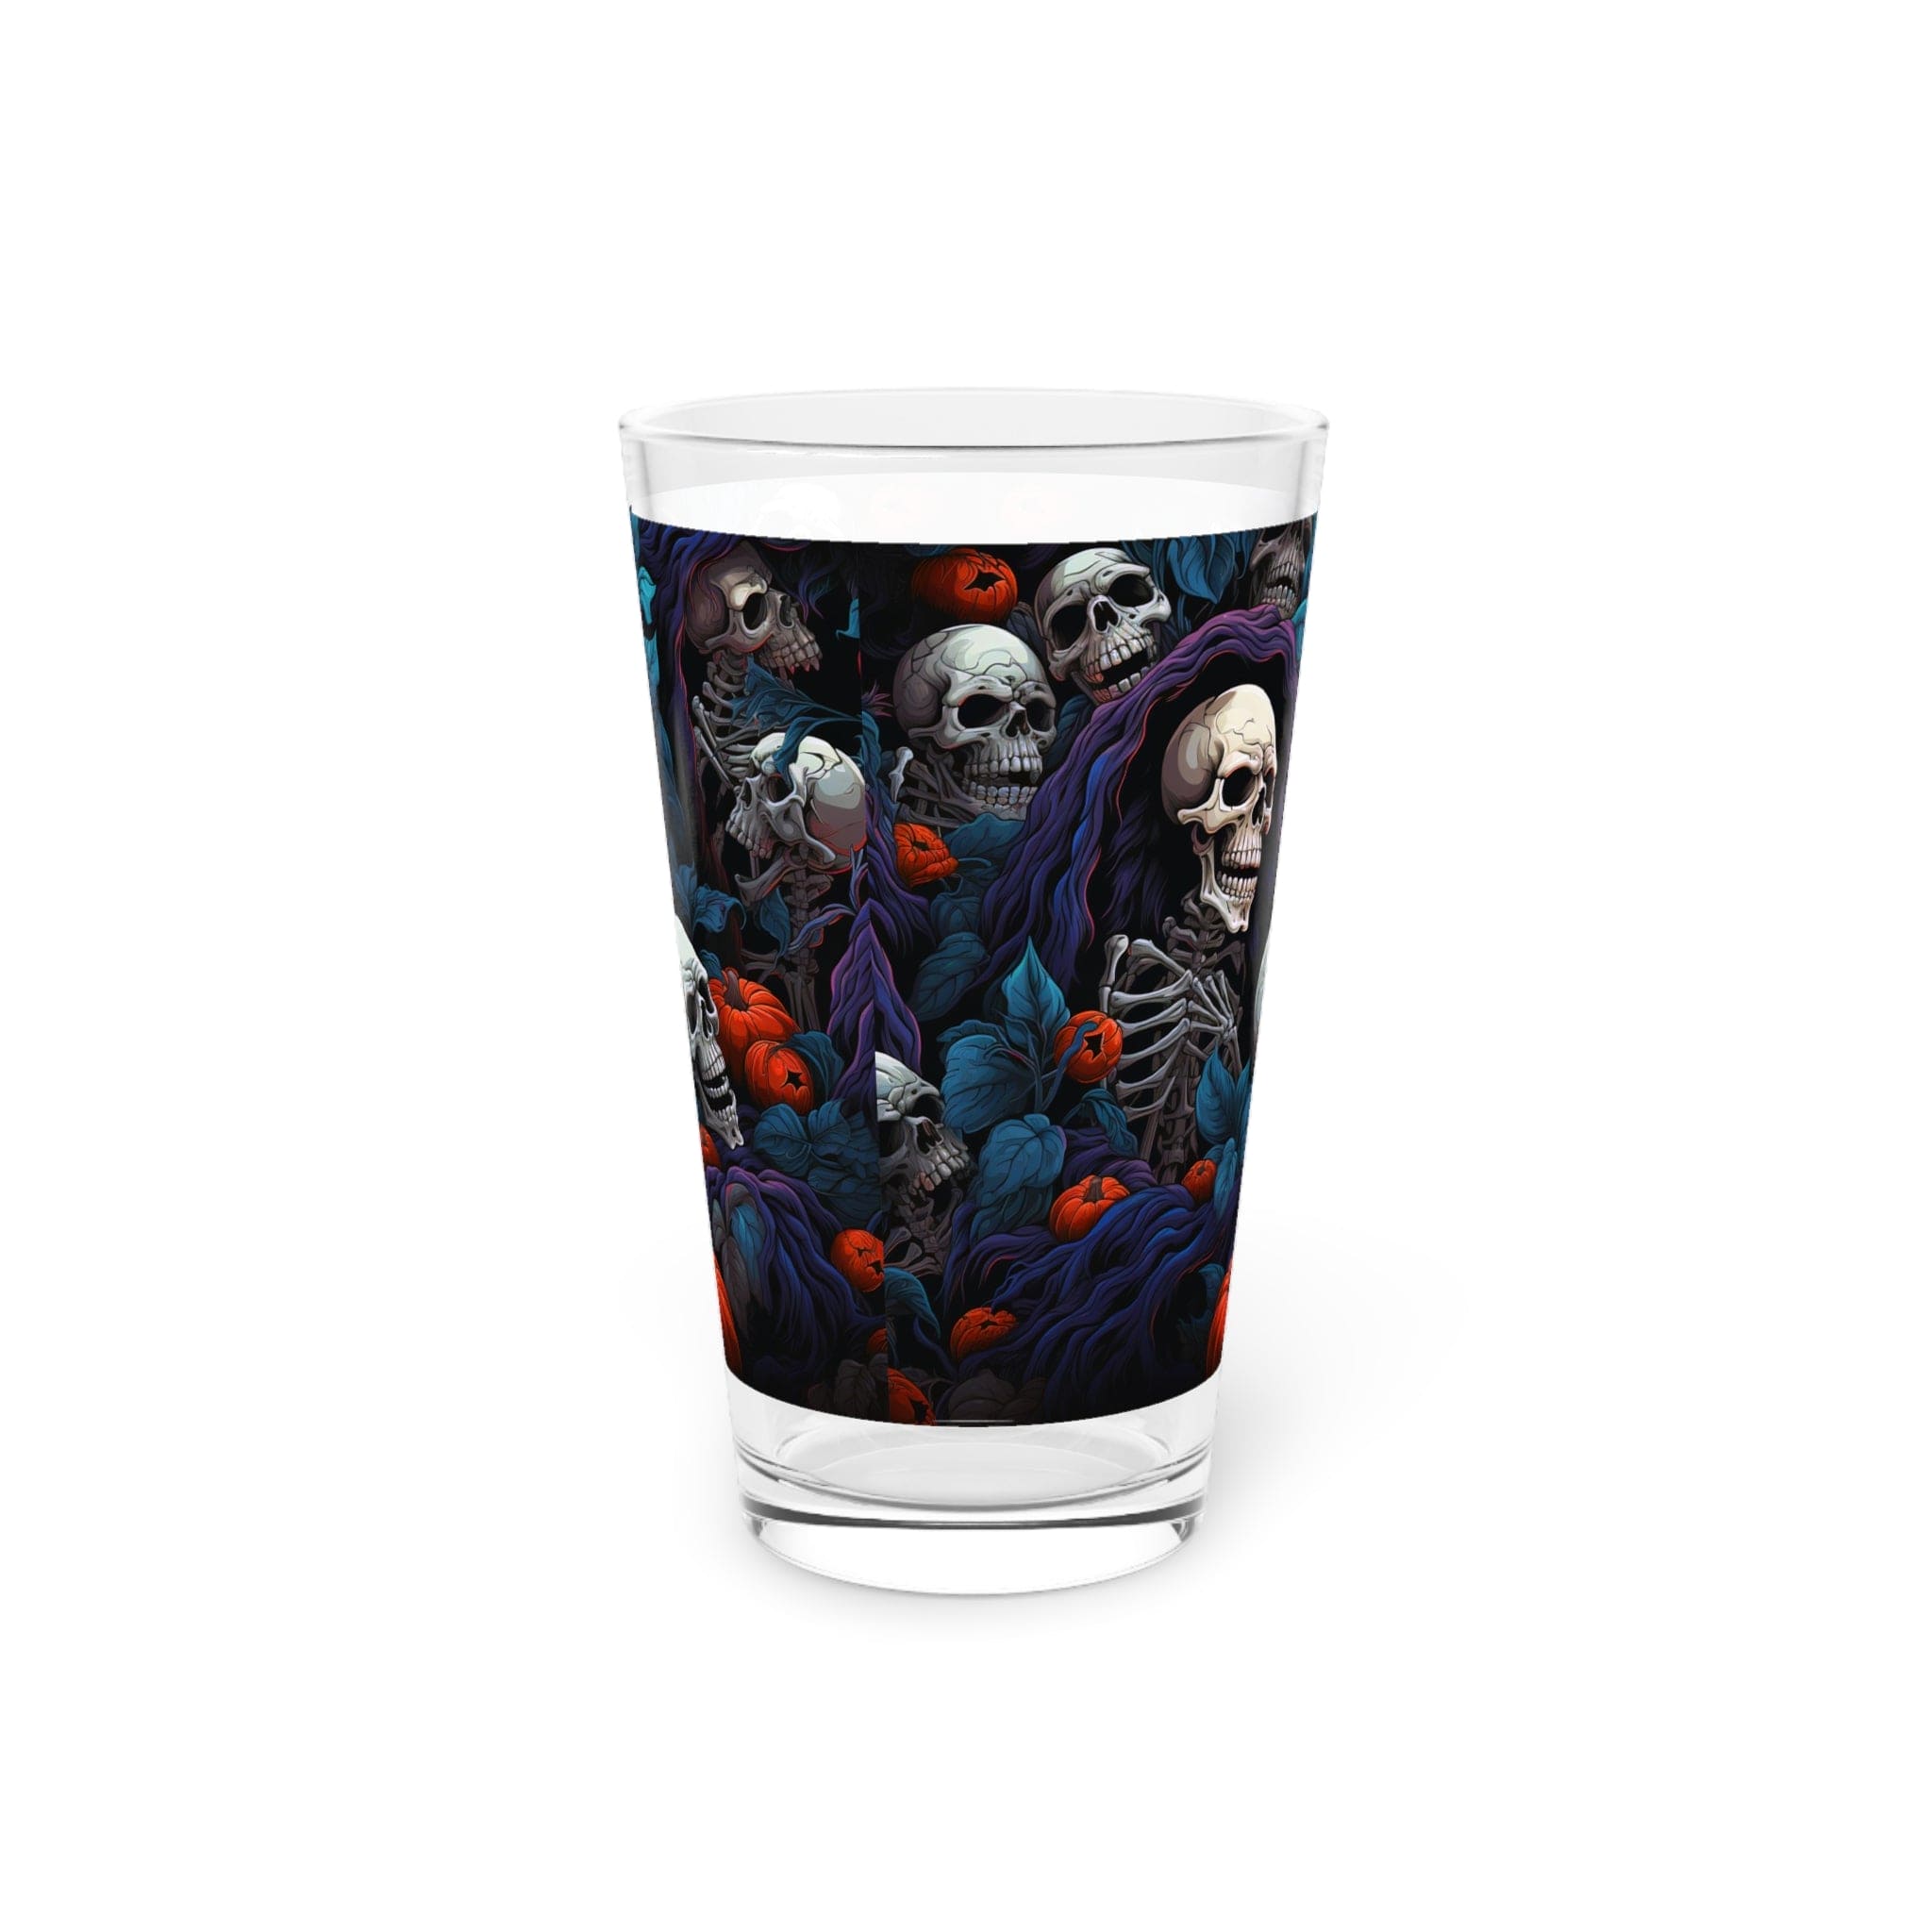 Skulls With Red Blue Flowers Pint Glass, 16oz